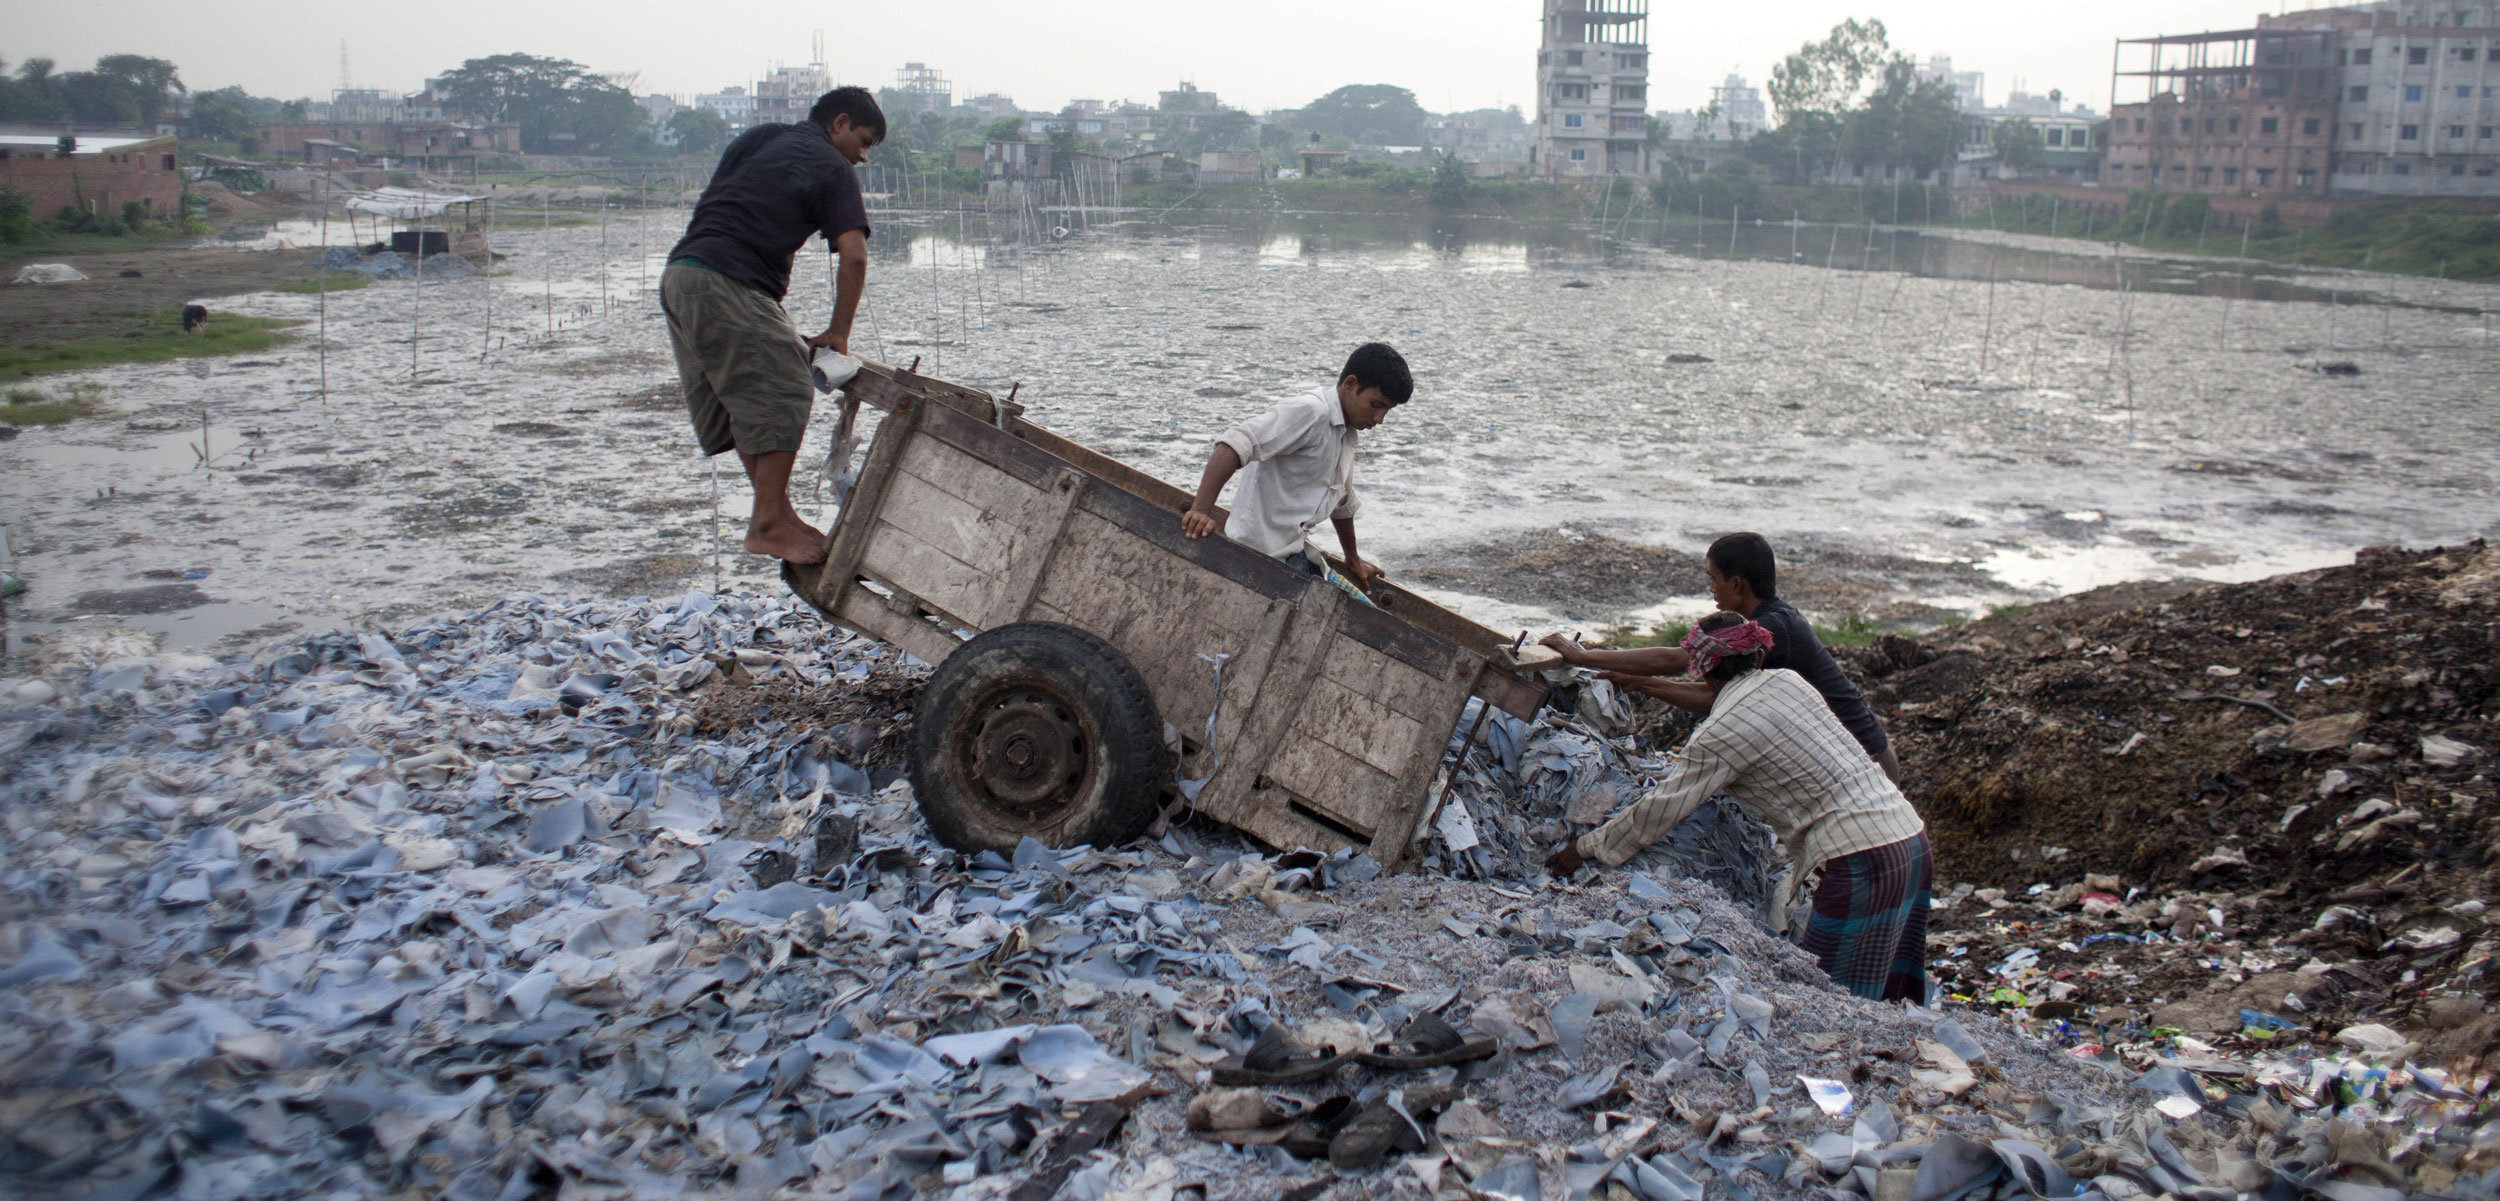 In Bangladesh, leather factories long dumped their toxic wastewater into the Buriganga River and discarded their leather scraps along its banks. Today, parts of the river are almost dead. Photo by Zuma Press, Inc./Alamy Stock Photo